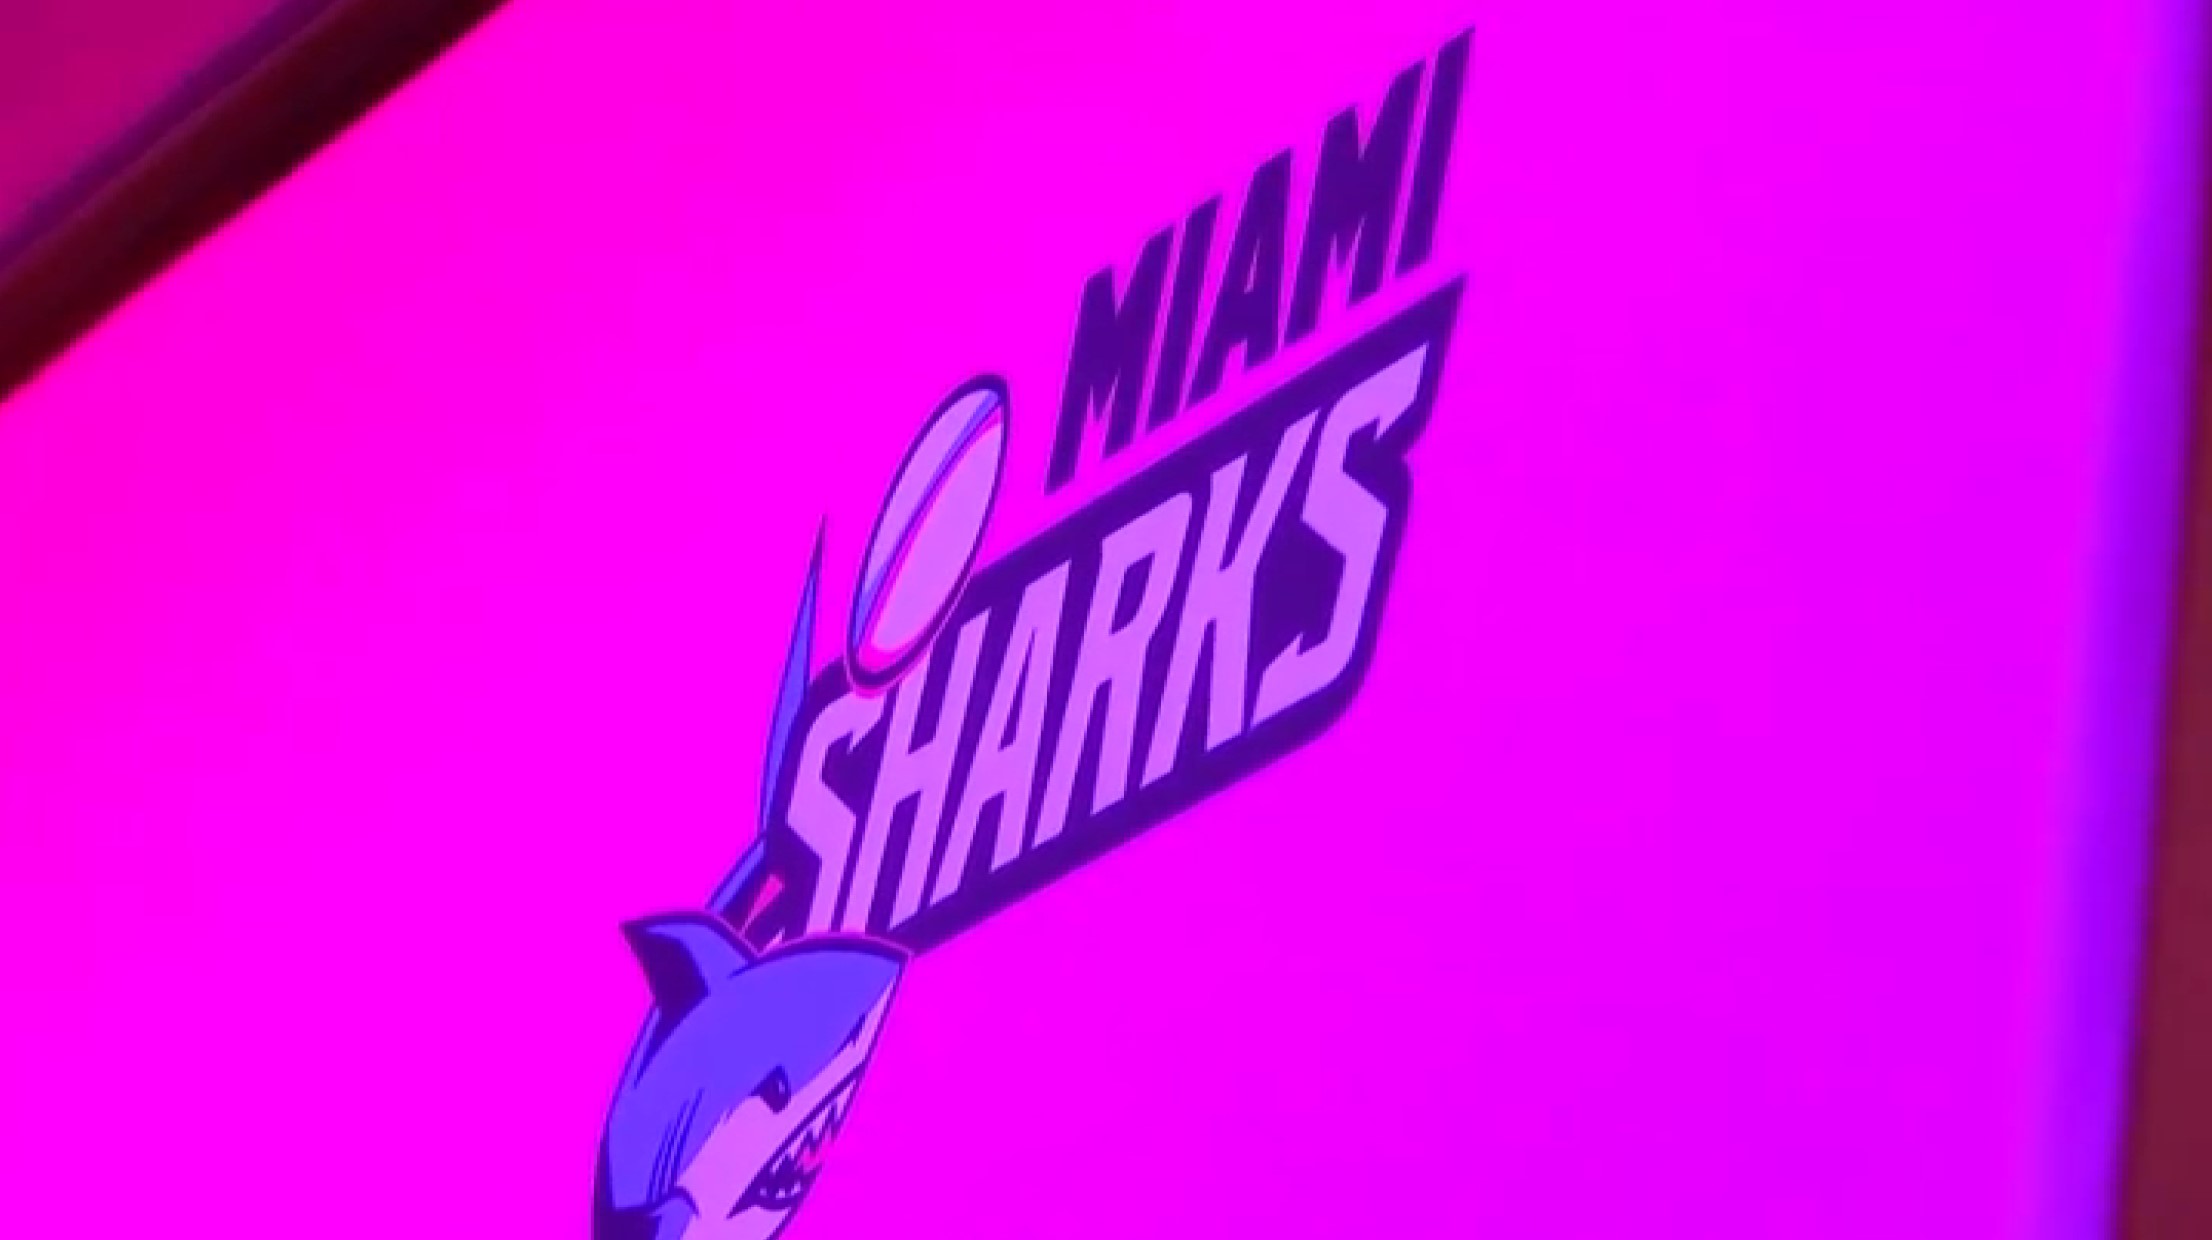 Miami Sharks - MLR's New Wave: Join the Rugby Revolution in 2024